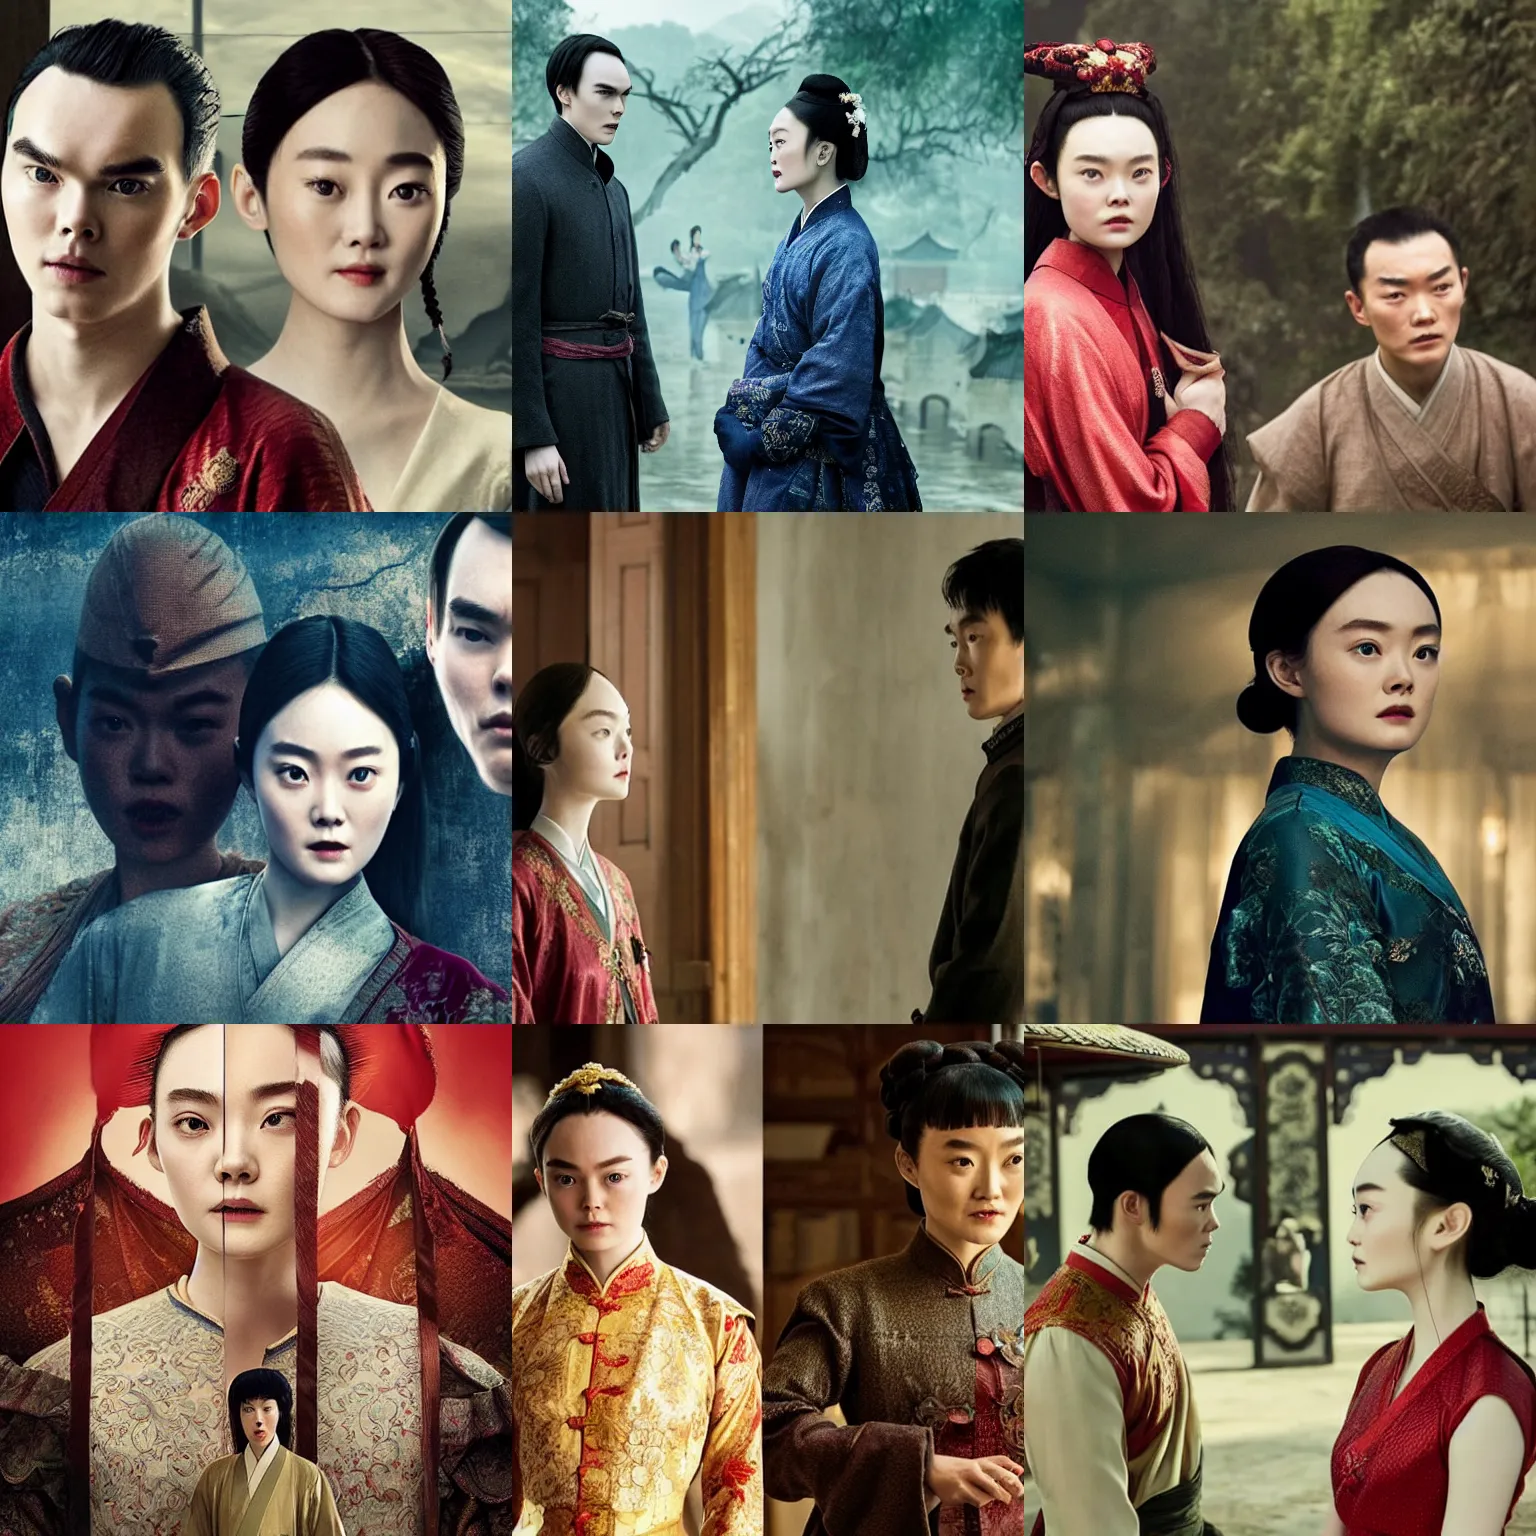 Prompt: The Story of Minglan, in the leading roles Elle Fanning, Nicholas Hoult and Gong Li, series on Netflix